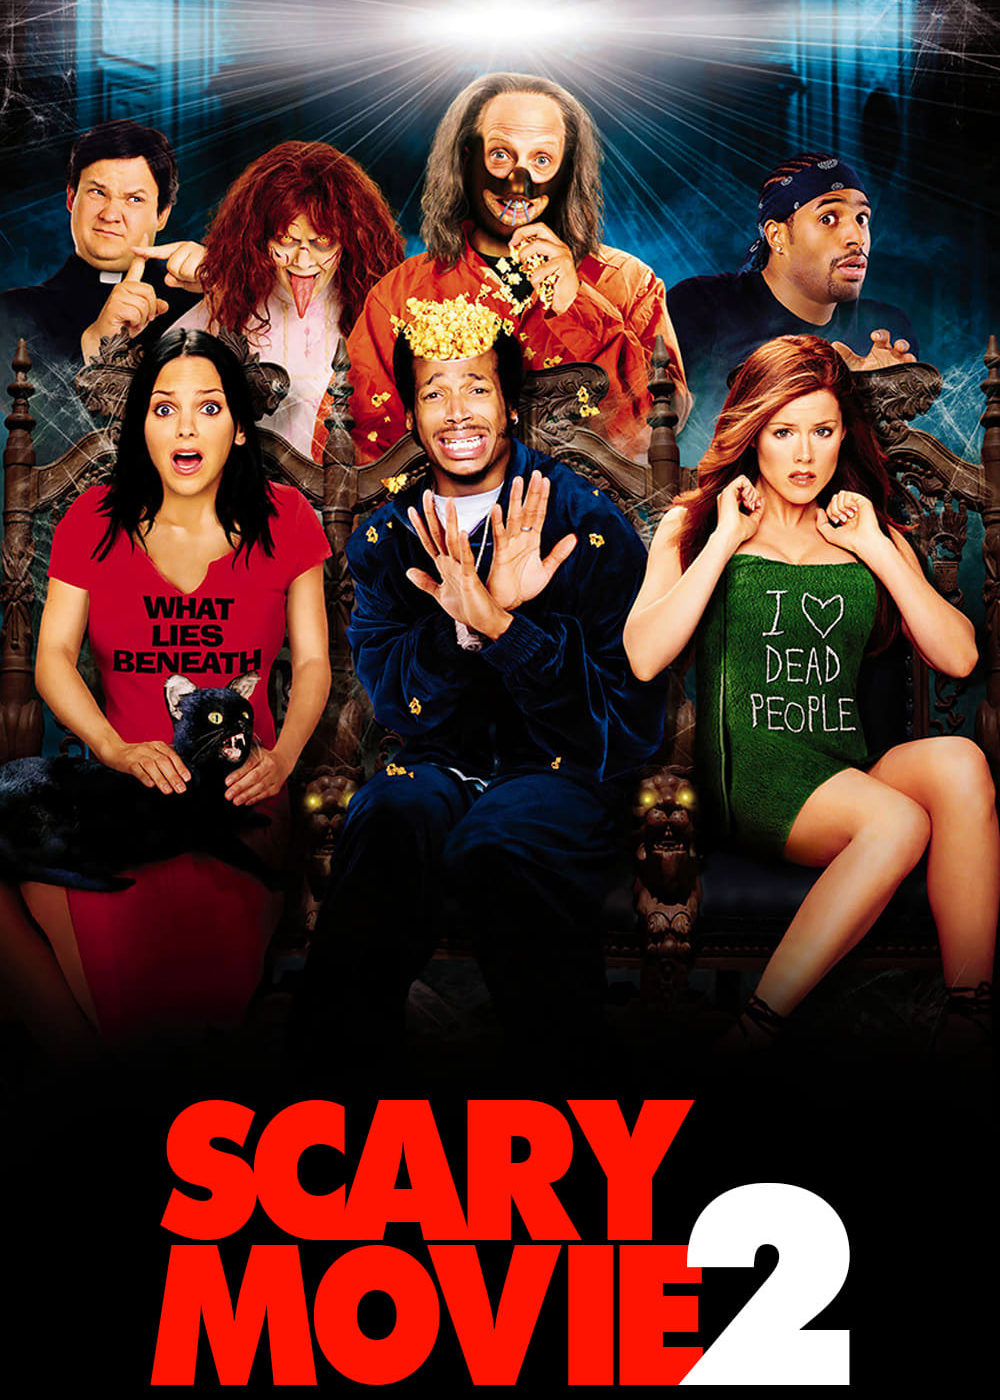 Poster Phim Phim Kinh Dị 2 (Scary Movie 2)